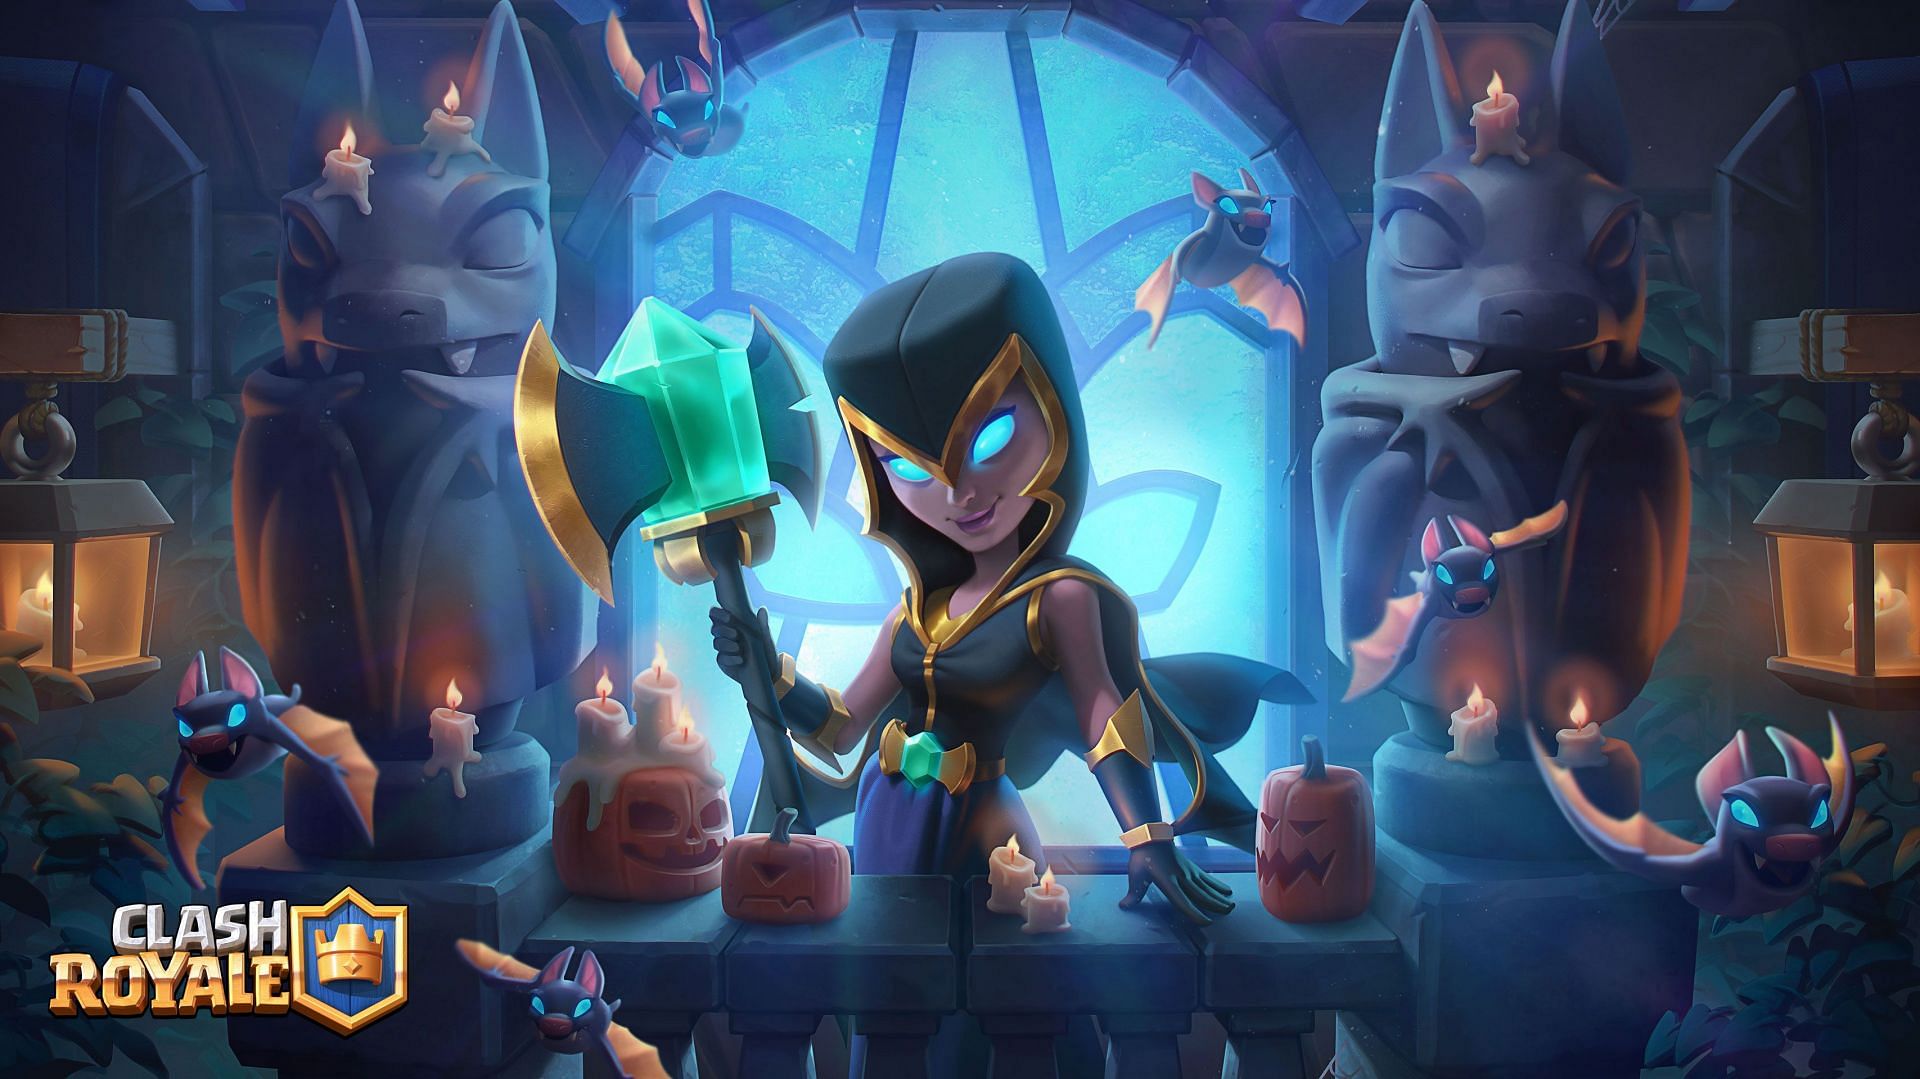 Night Witch in Clash Royale (Image via Supercell)